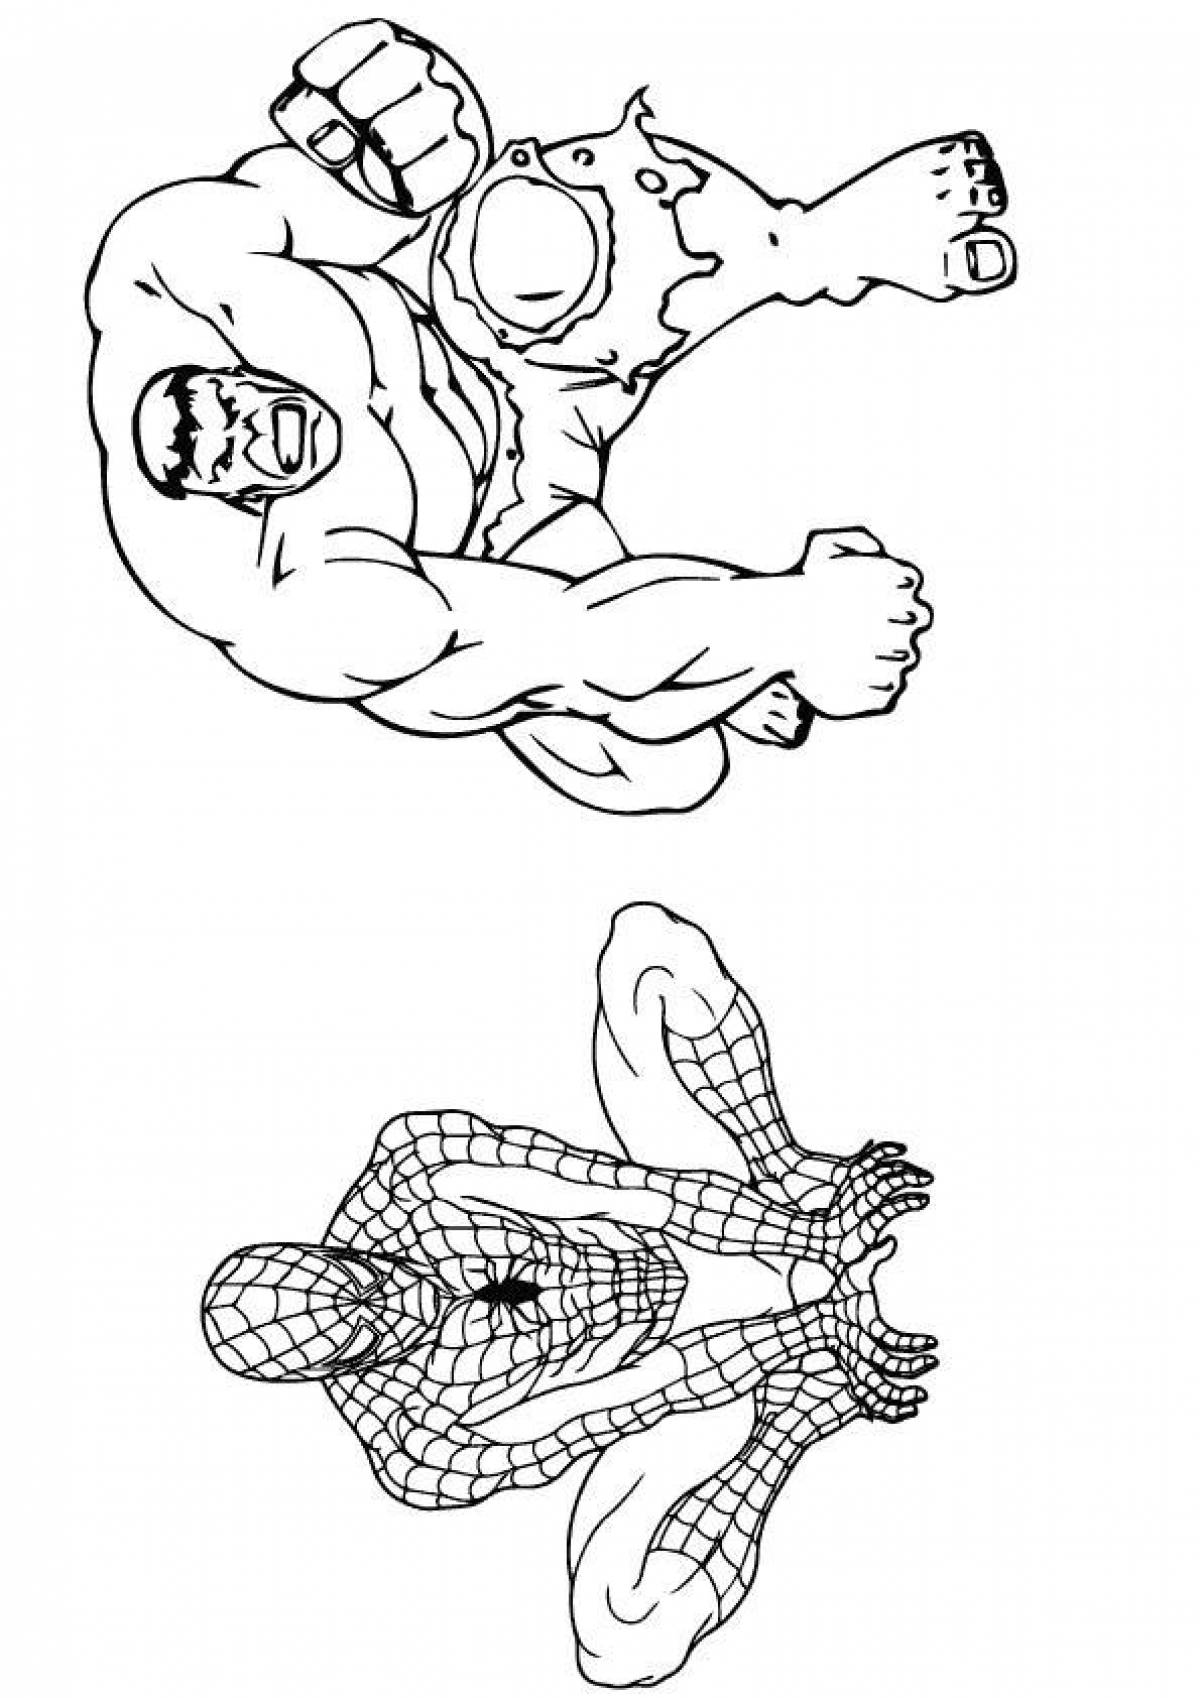 Lively hulk and spiderman coloring book